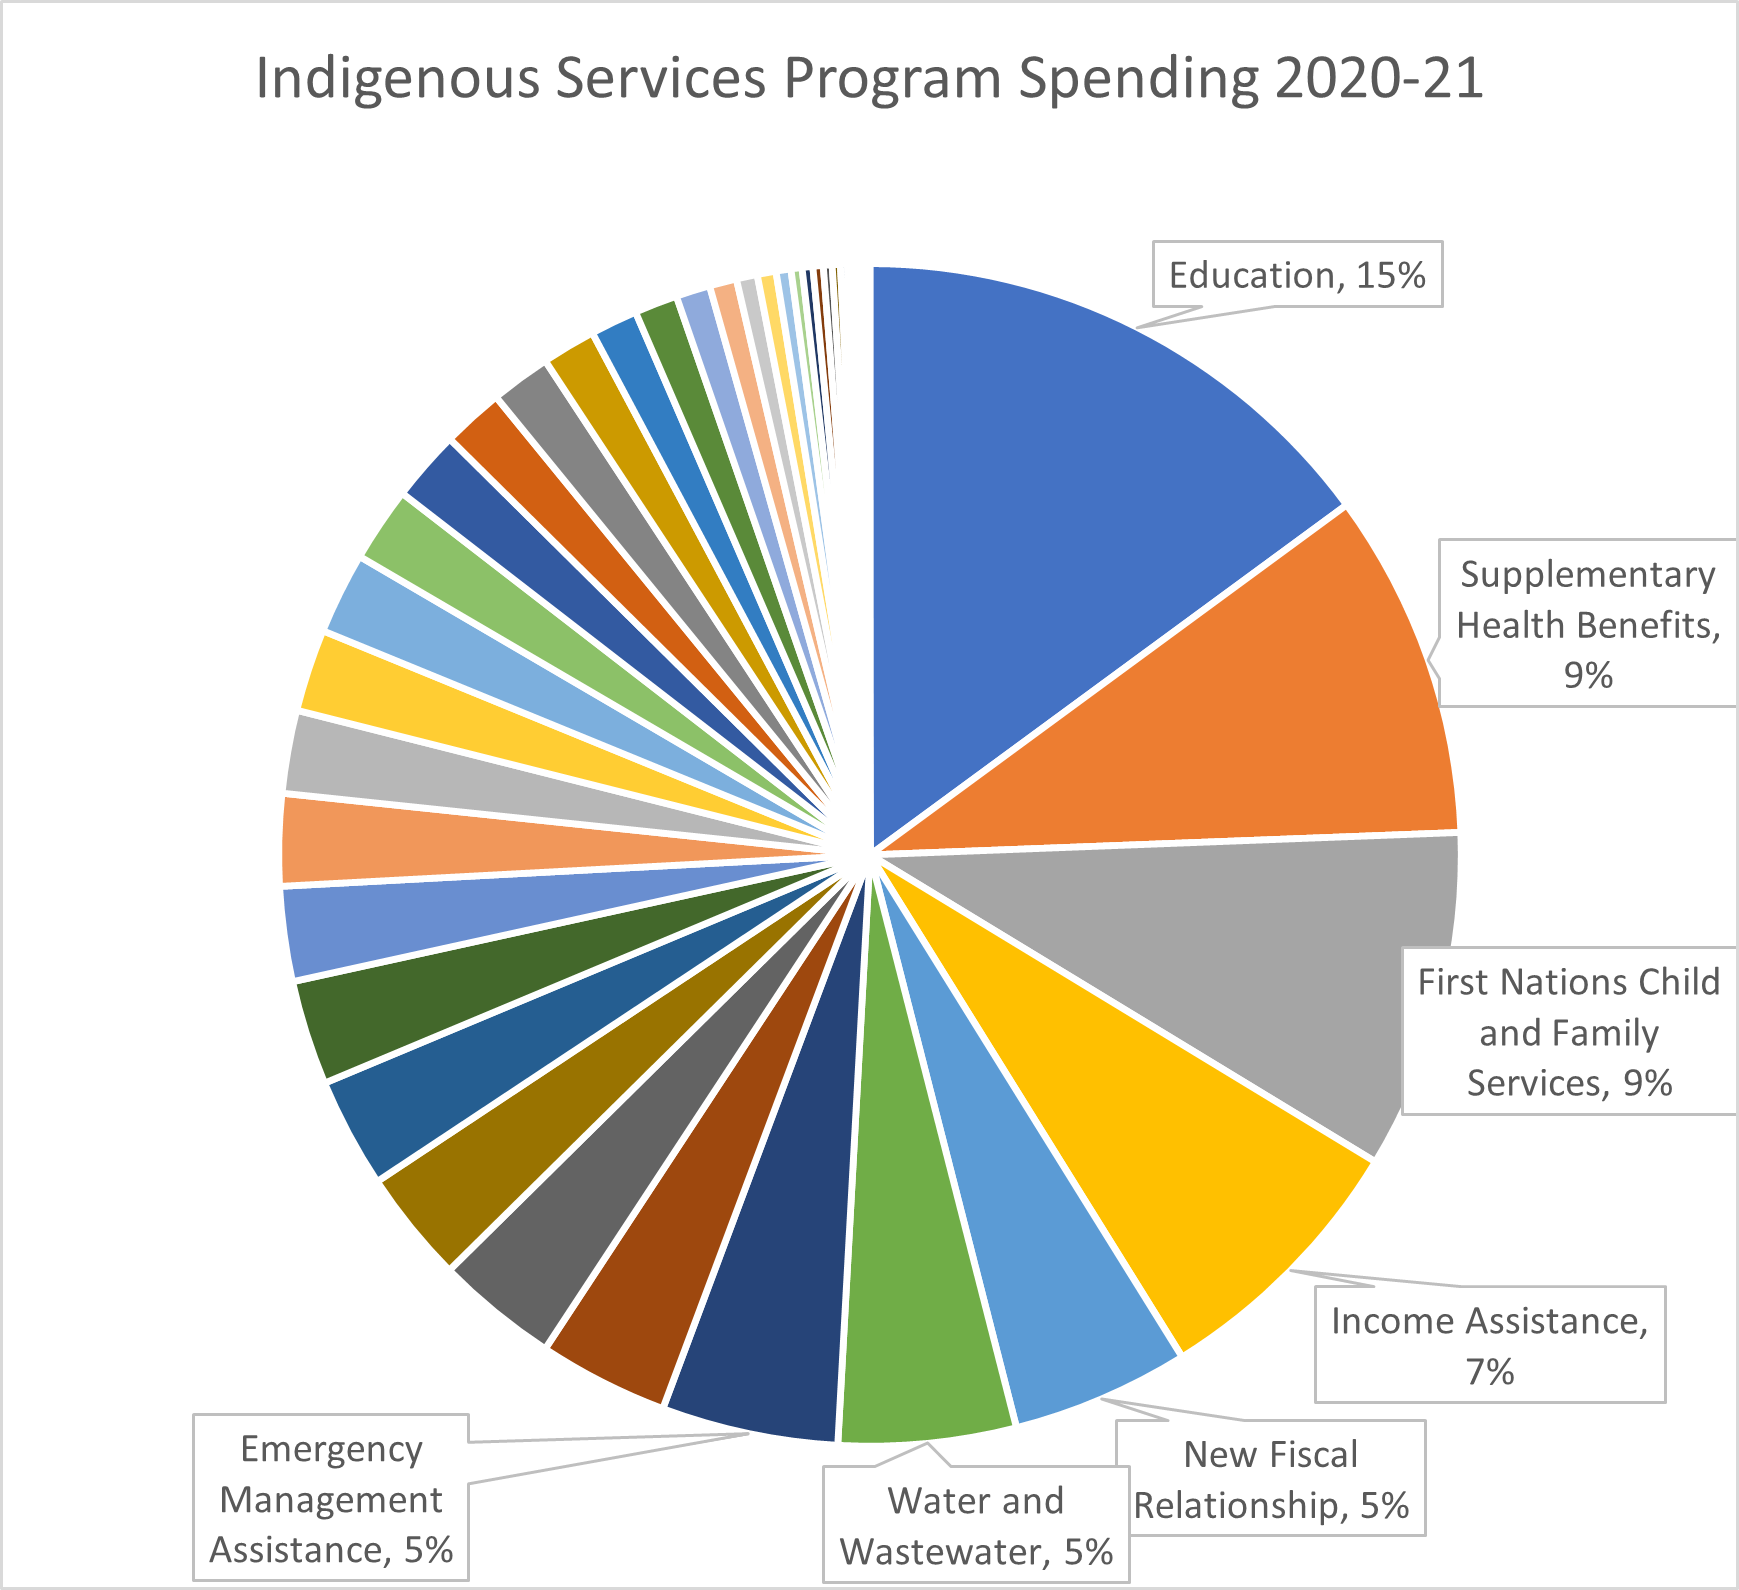 The largest wedge in the pie chart is Education, at 15%. Supplementary Health Benefits is 9%, First Nations Child and Family Services is 9% also, Income Assistance is 7%, New Fiscal Relationship is 5%, Water and Wastewater is 5%, and Emergency Management Assistance is 5%. The remaining 45% of spending is divided between more than twenty additional categories.